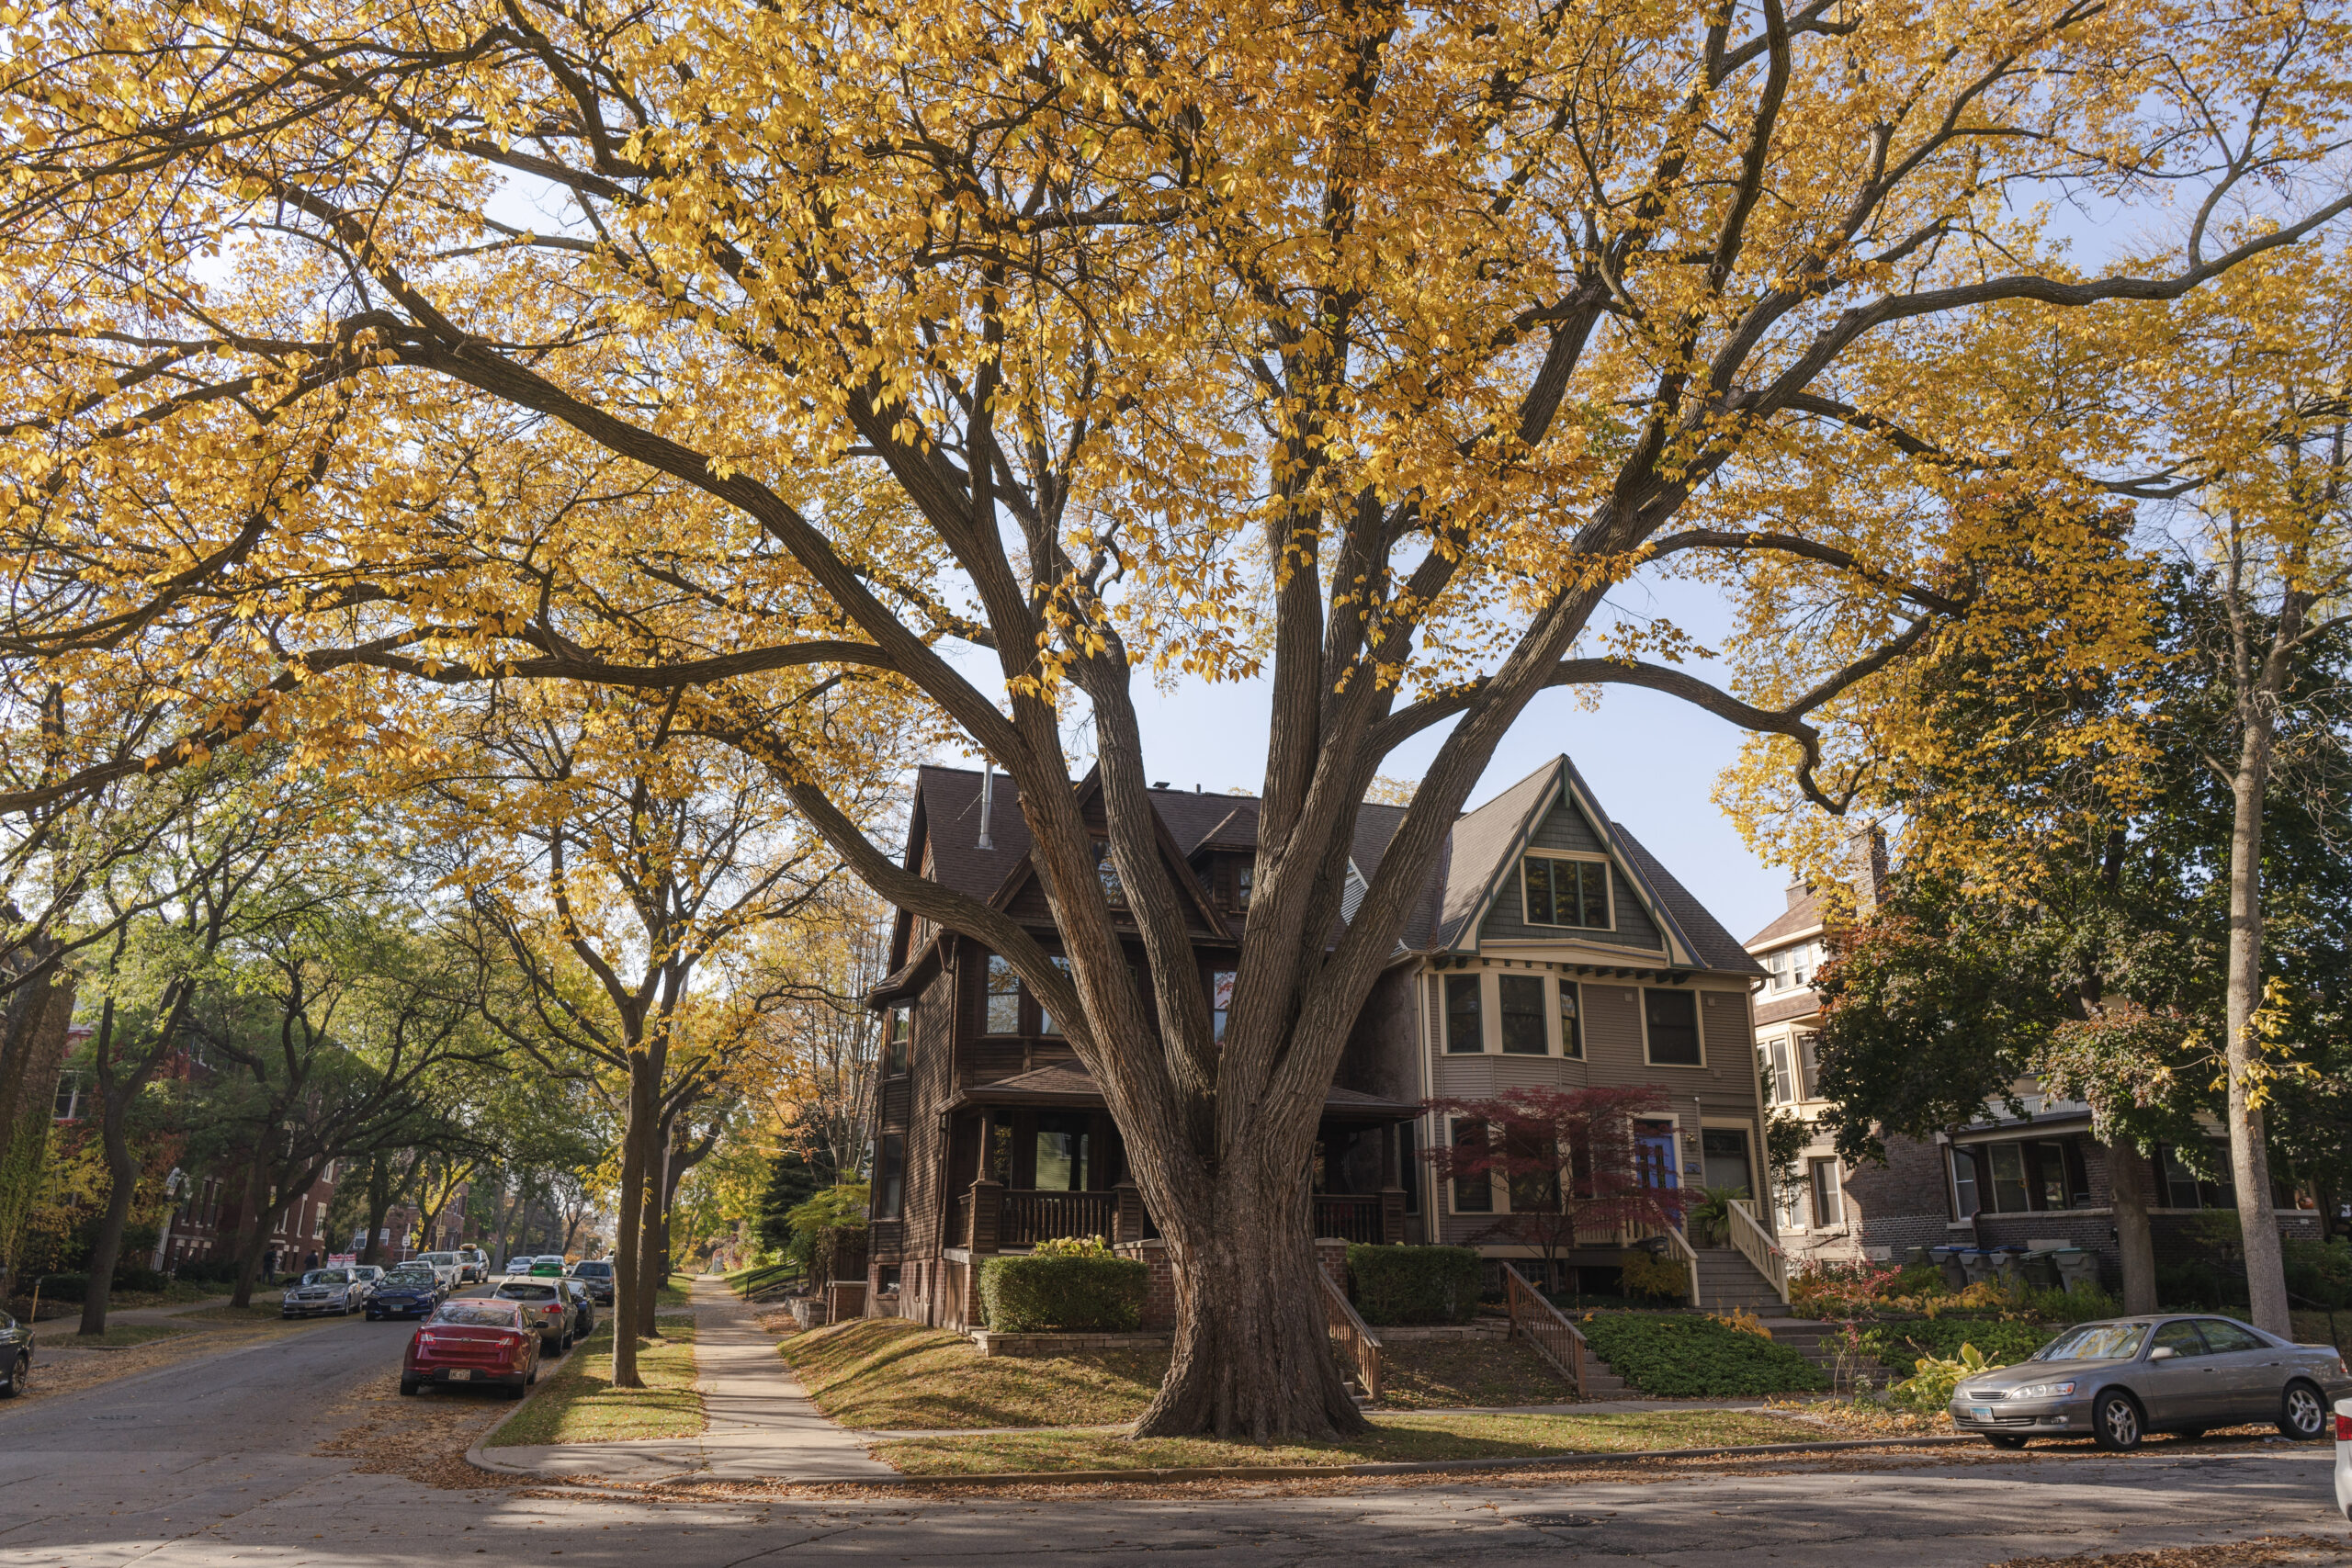 Searching for Wisconsin’s majestic champion trees